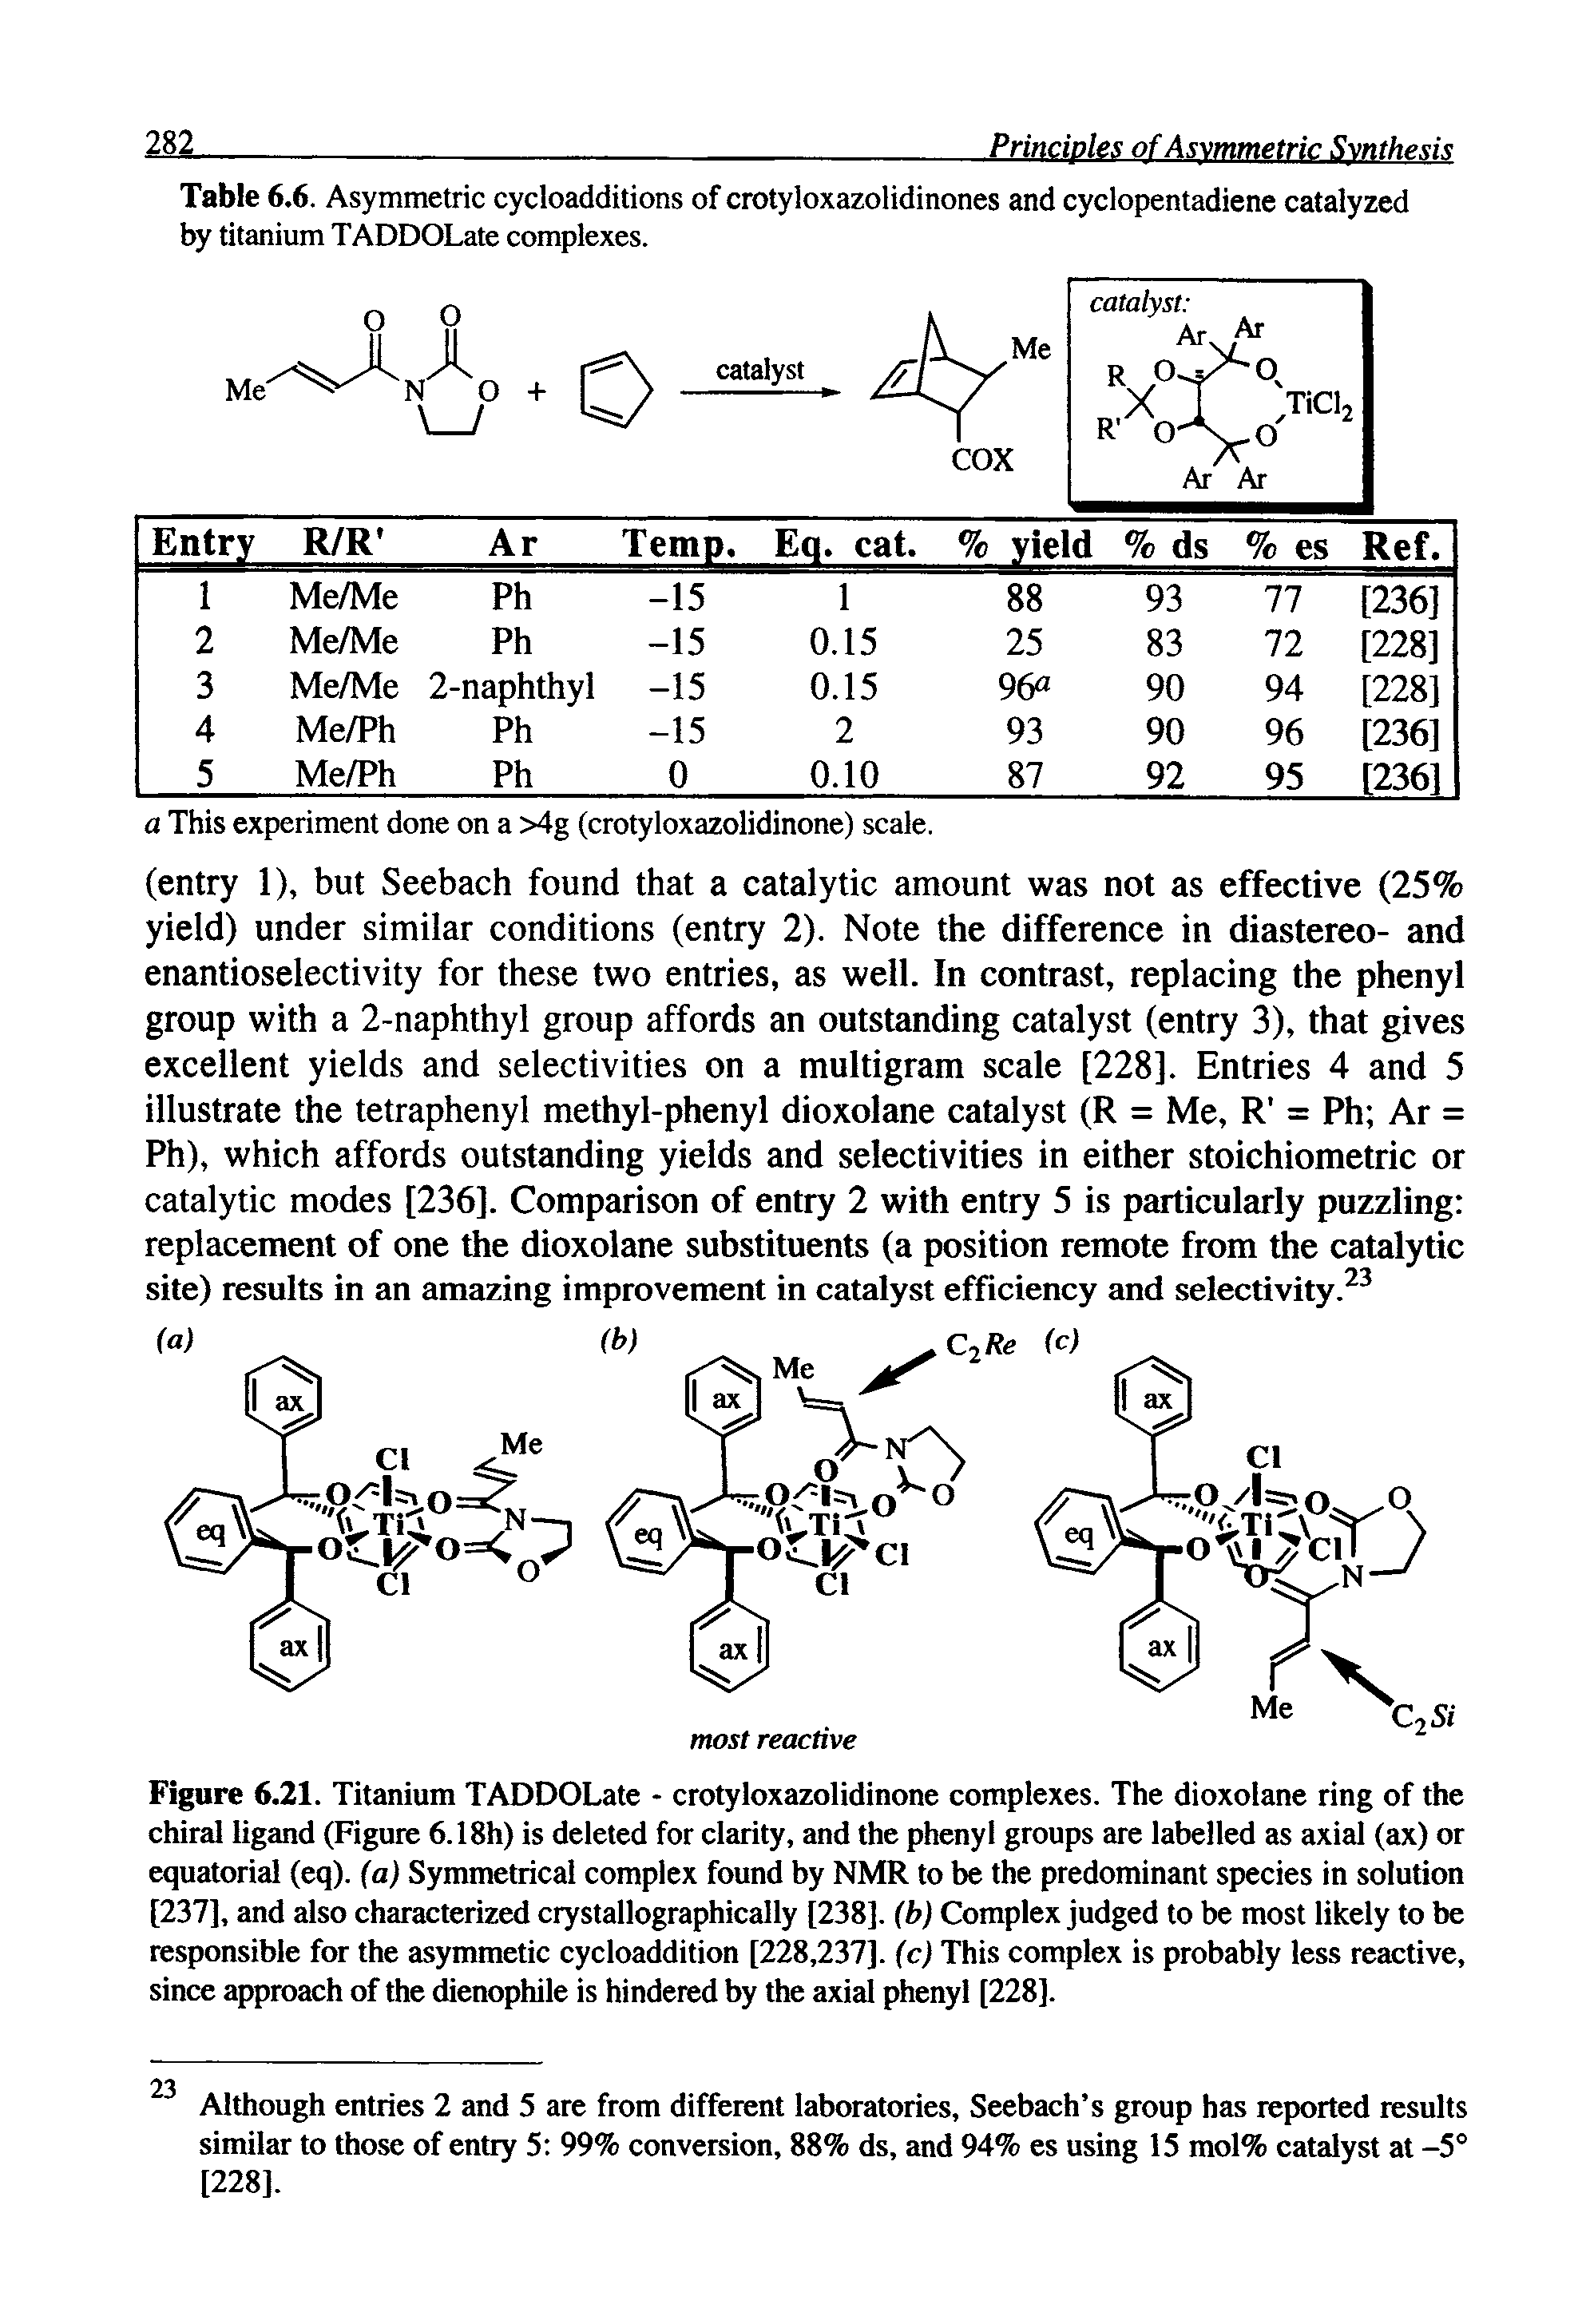 Table 6.6. Asymmetric cycloadditions of crotyloxazolidinones and cyclopentadiene catalyzed by titanium TADDOLate complexes.